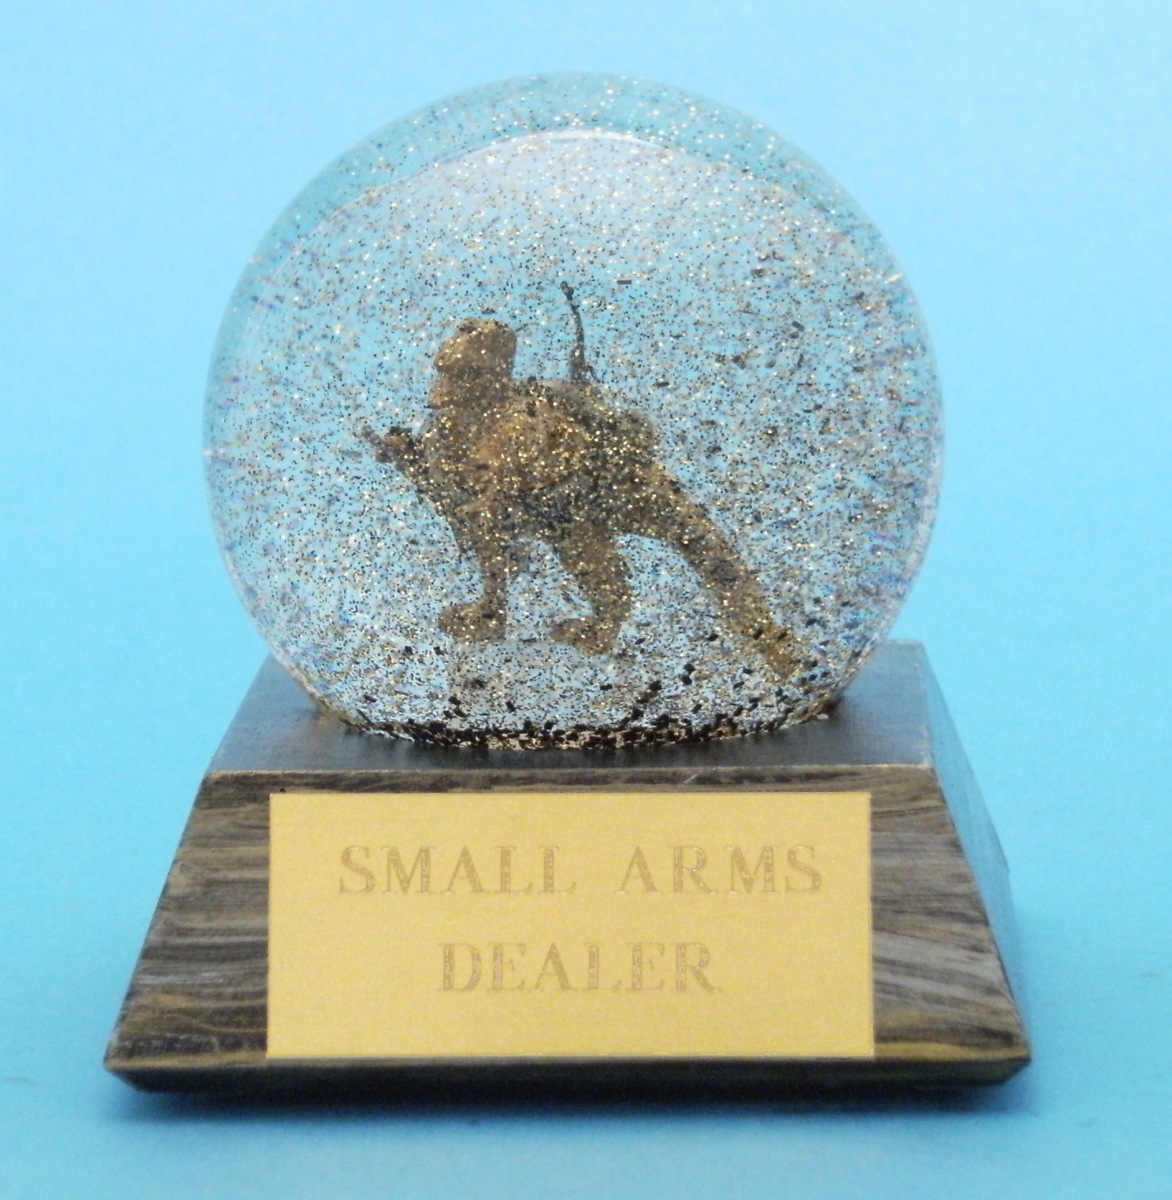 Small Arms Dealer snow globe Camryn Forrest Designs 2016